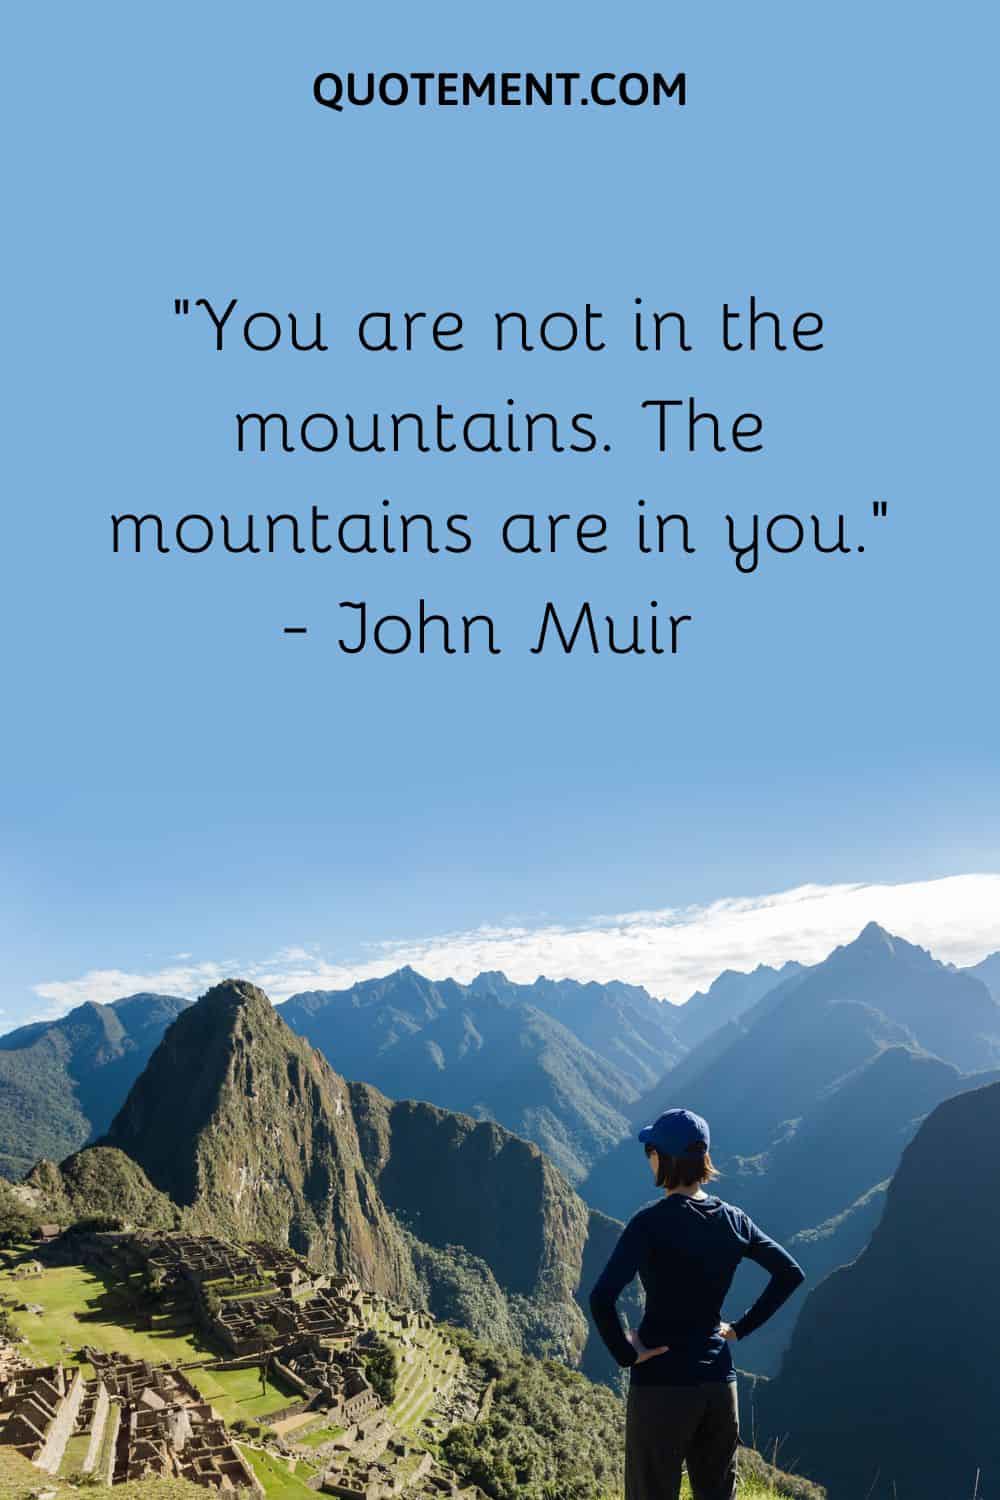 “You are not in the mountains. The mountains are in you.” — John Muir